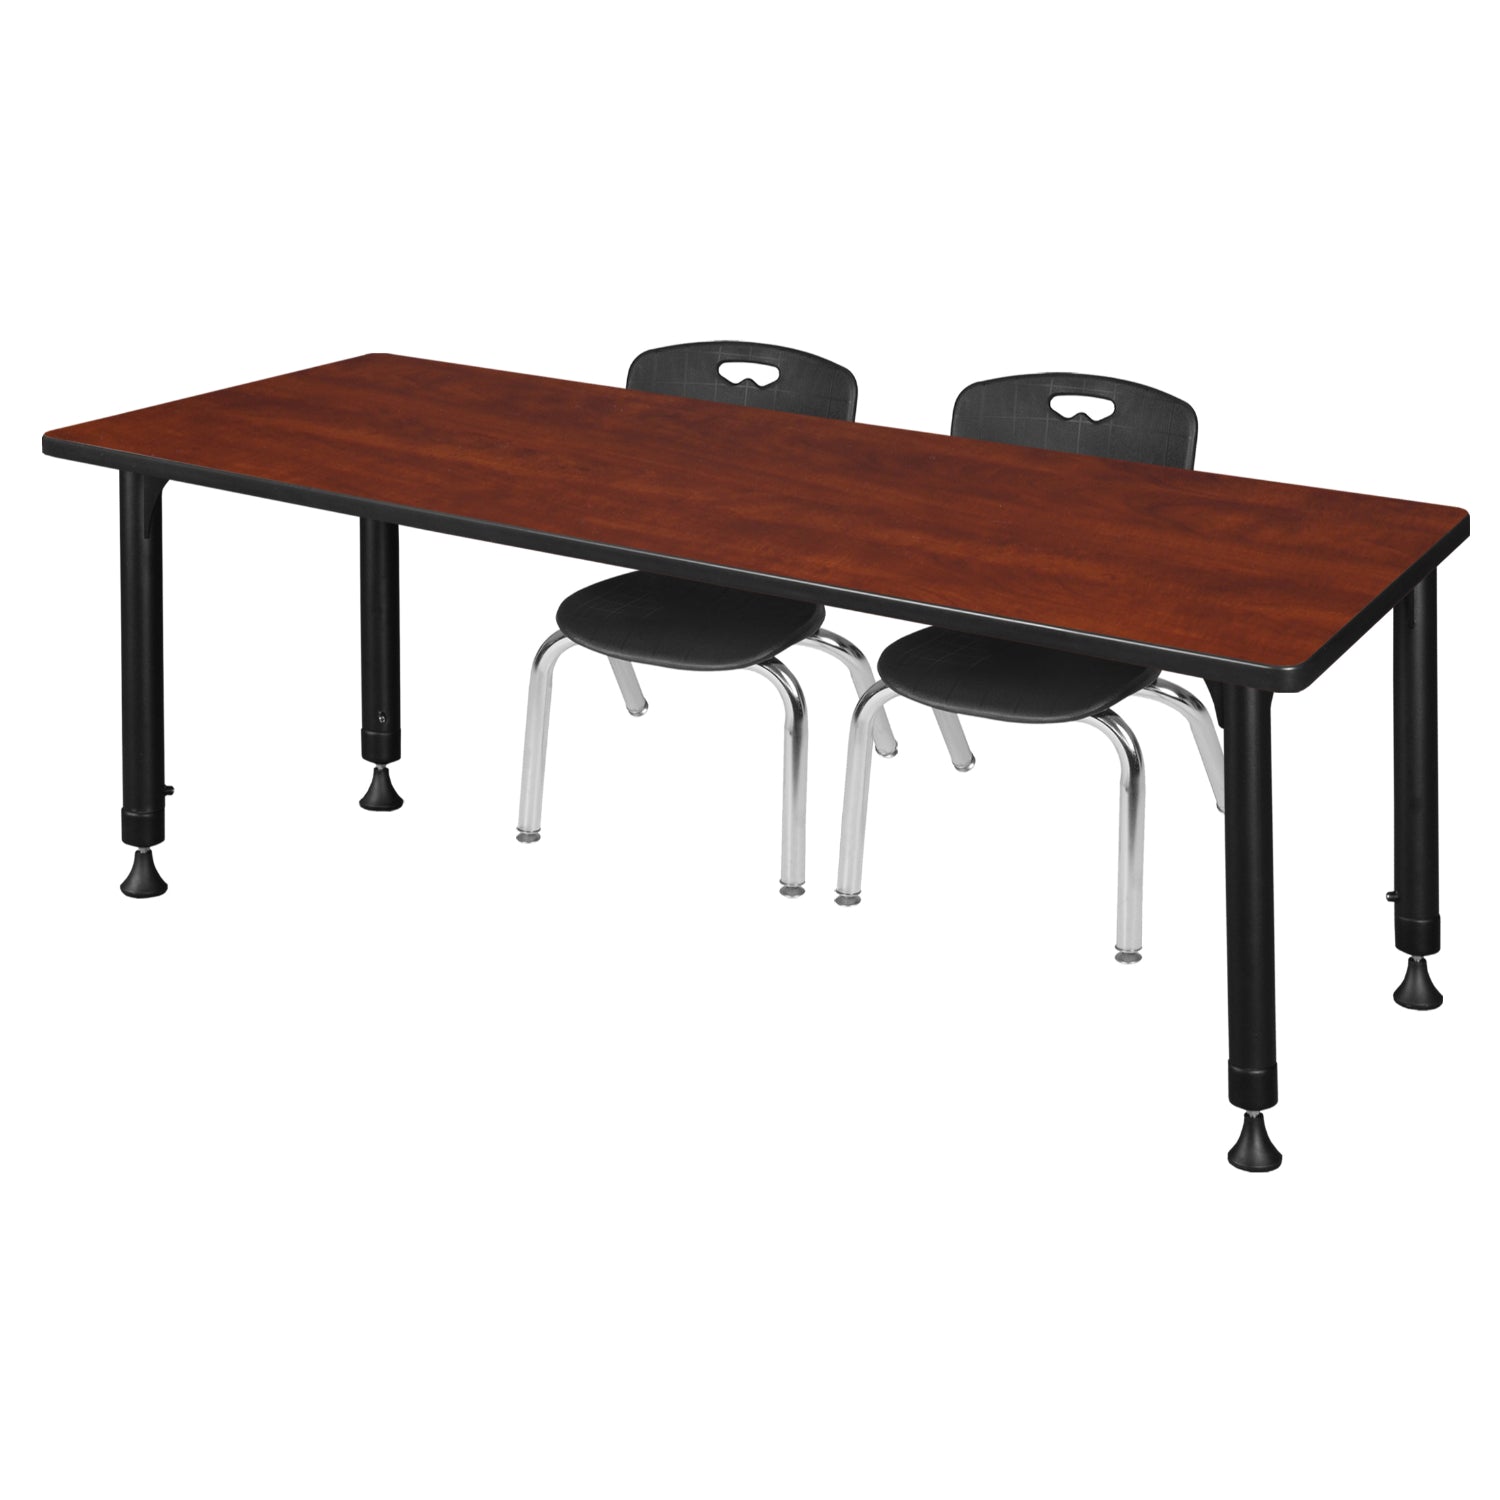 Kee Classroom Table and Chair Package, Kee 72" x 30" Rectangular Adjustable Height Table with 2 Andy 12" Stack Chairs